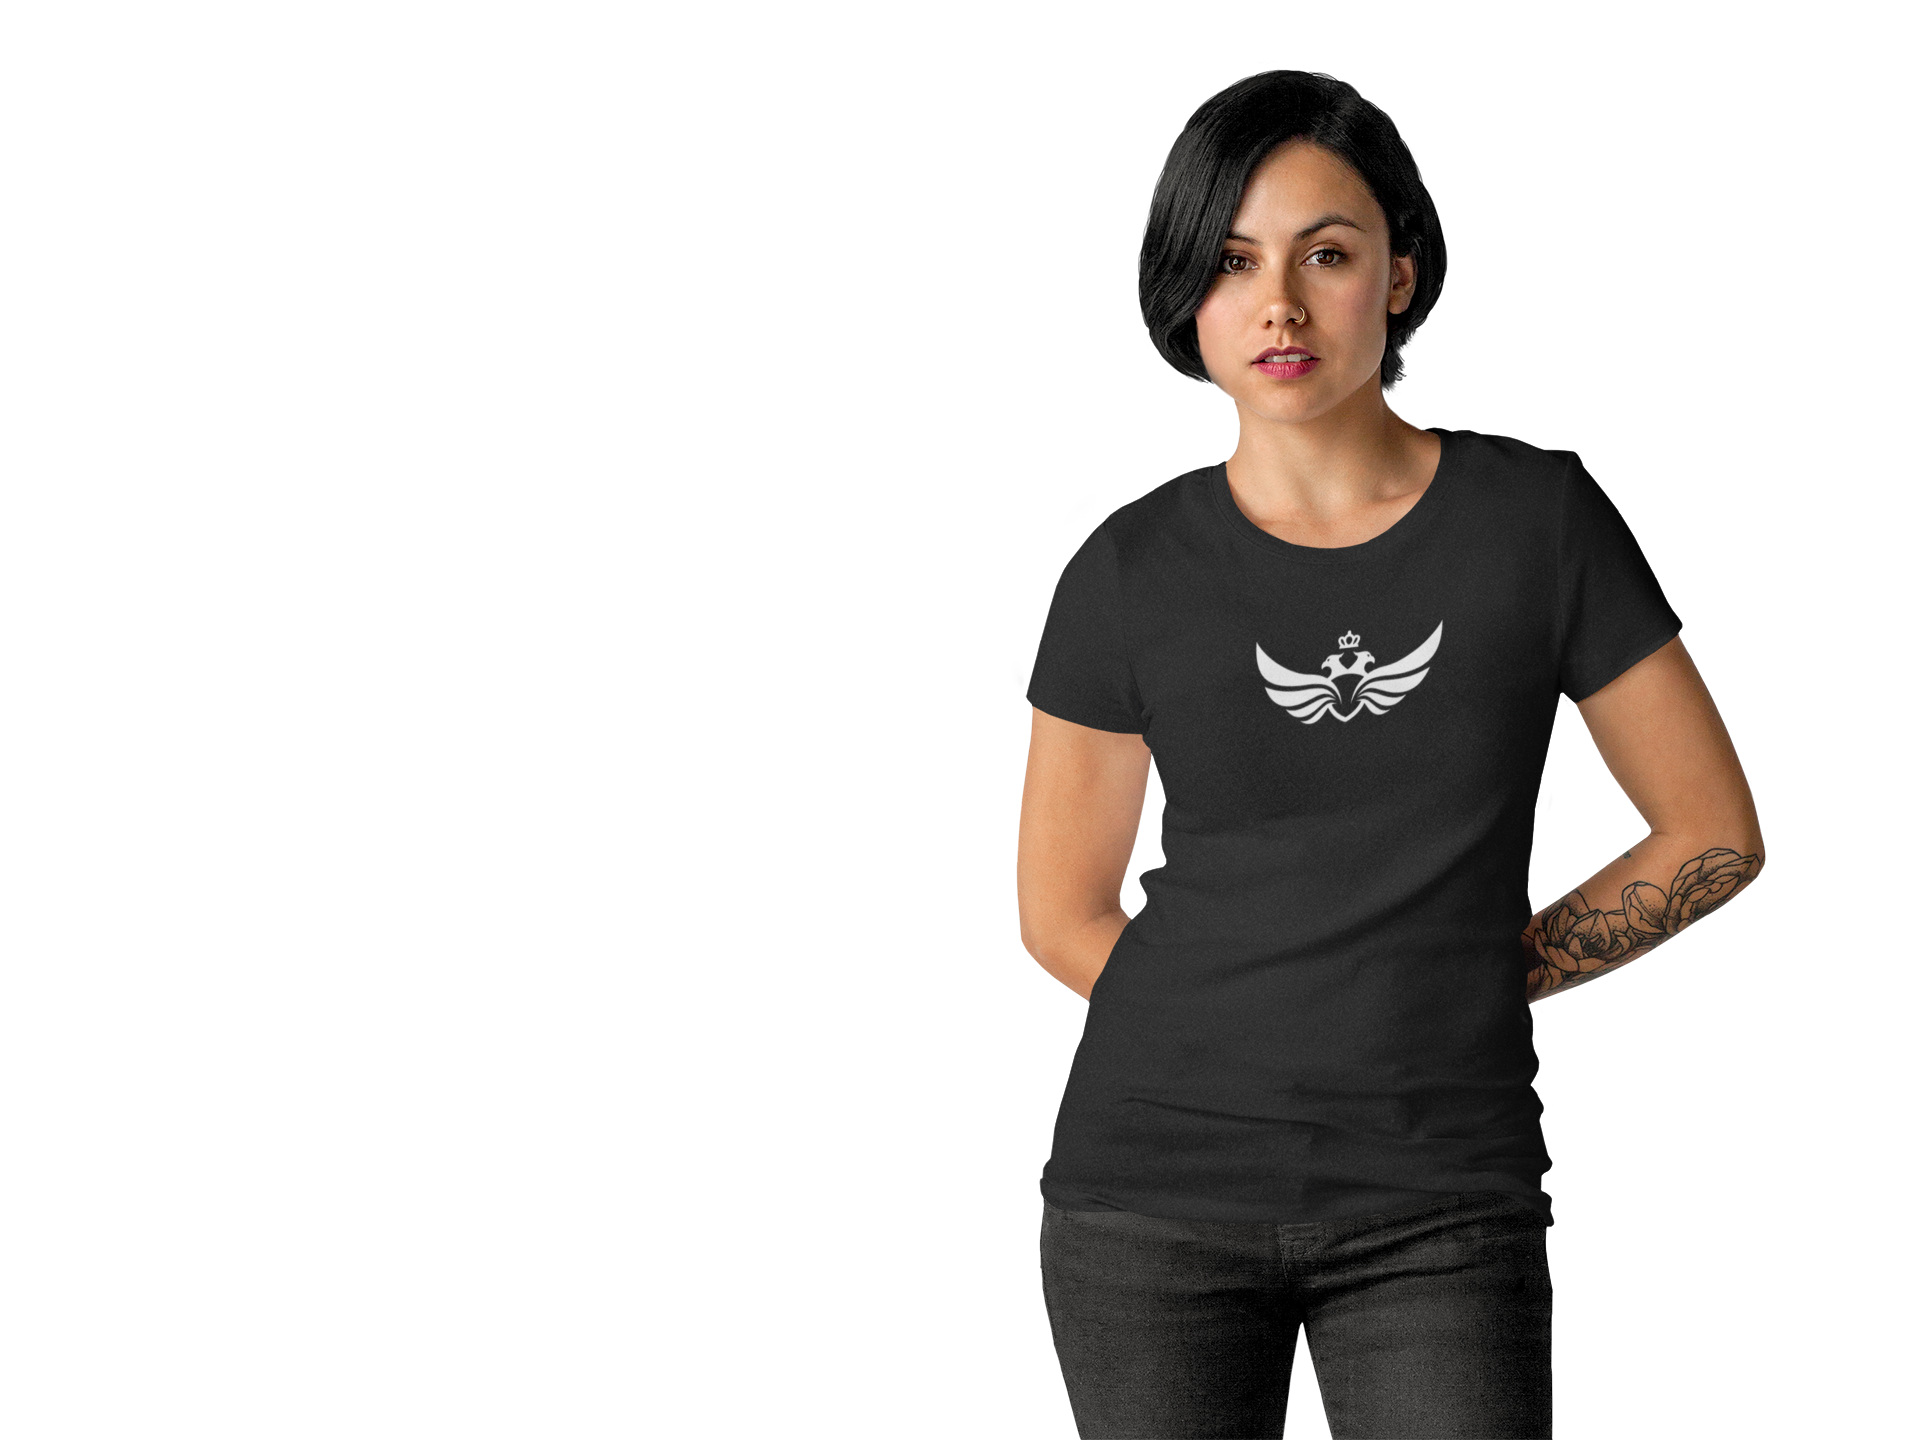 t-shirt-mockup-template-of-a-tattooed-woman-over-transparent-background-a10128 copy - Duran Shop